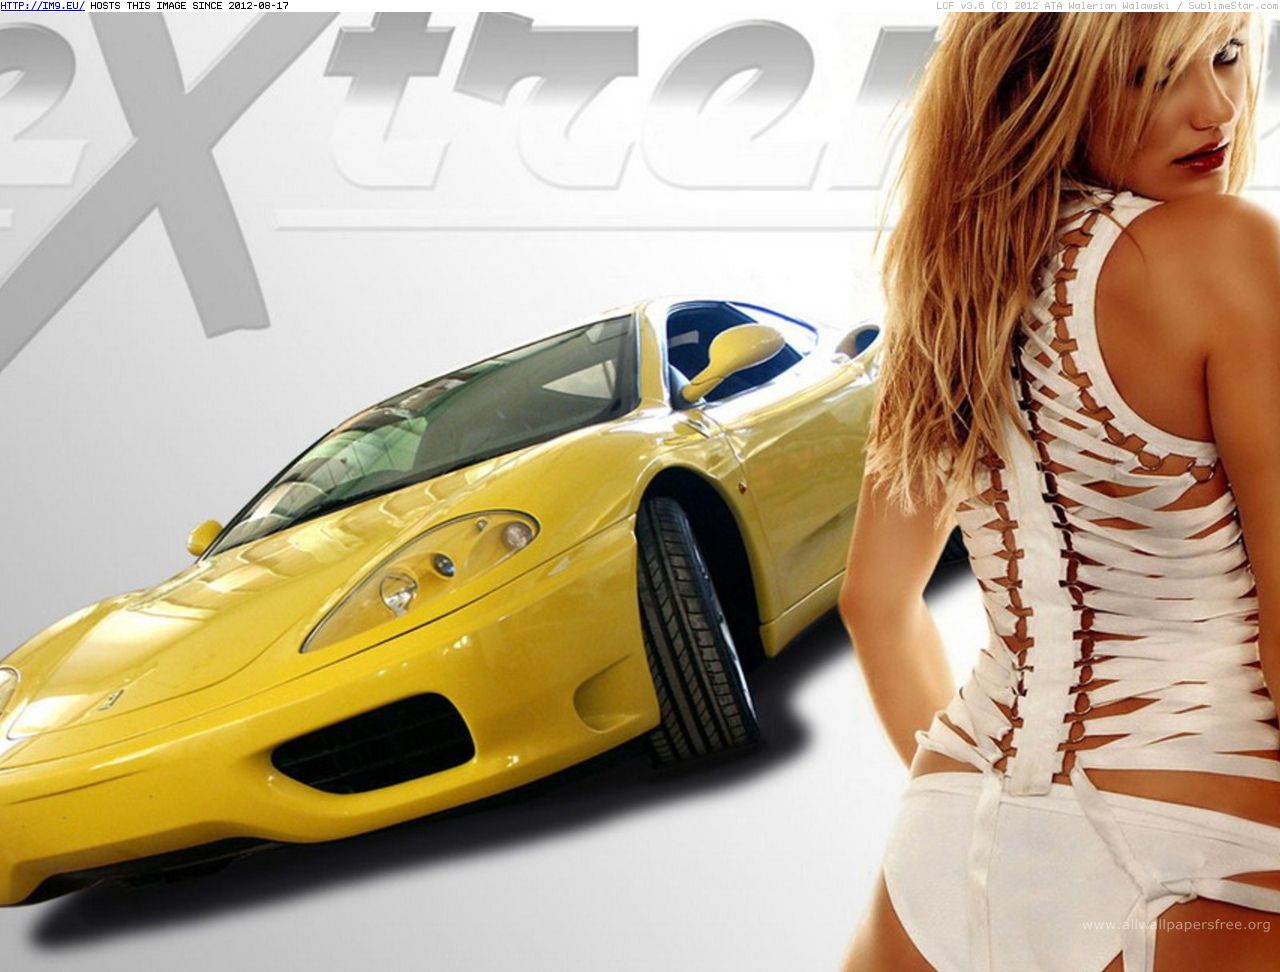 Bikes, Cars and Hot Models 18 (in Hot Models With Cars and Bikes)